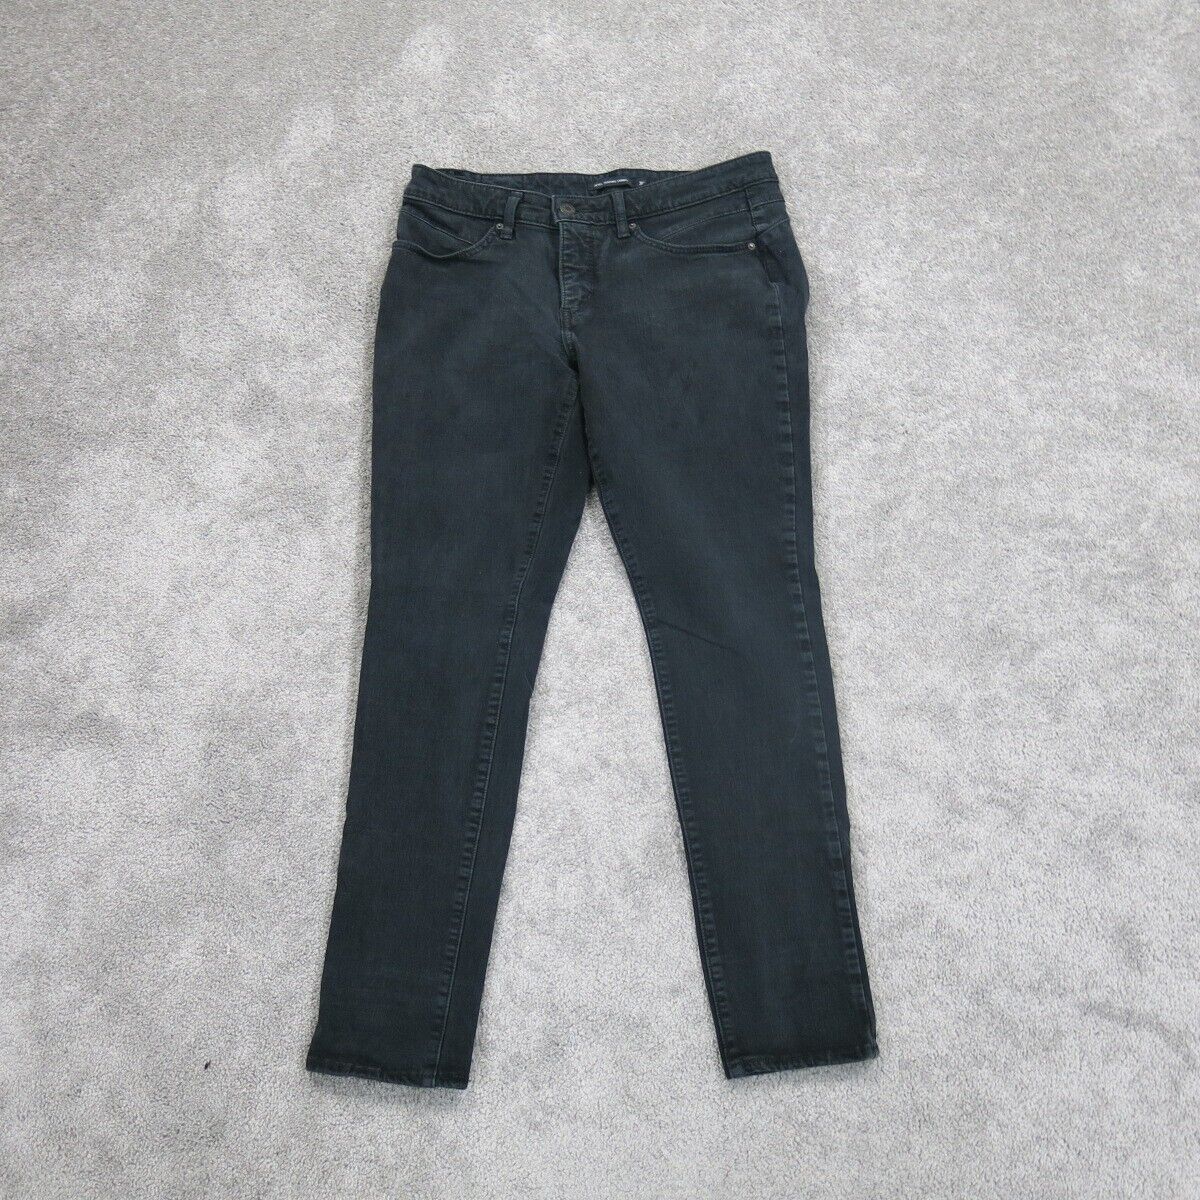 Levis Womens Shaping Skinny Jeans Mid Rise Flat Front Pockets Black Size 30